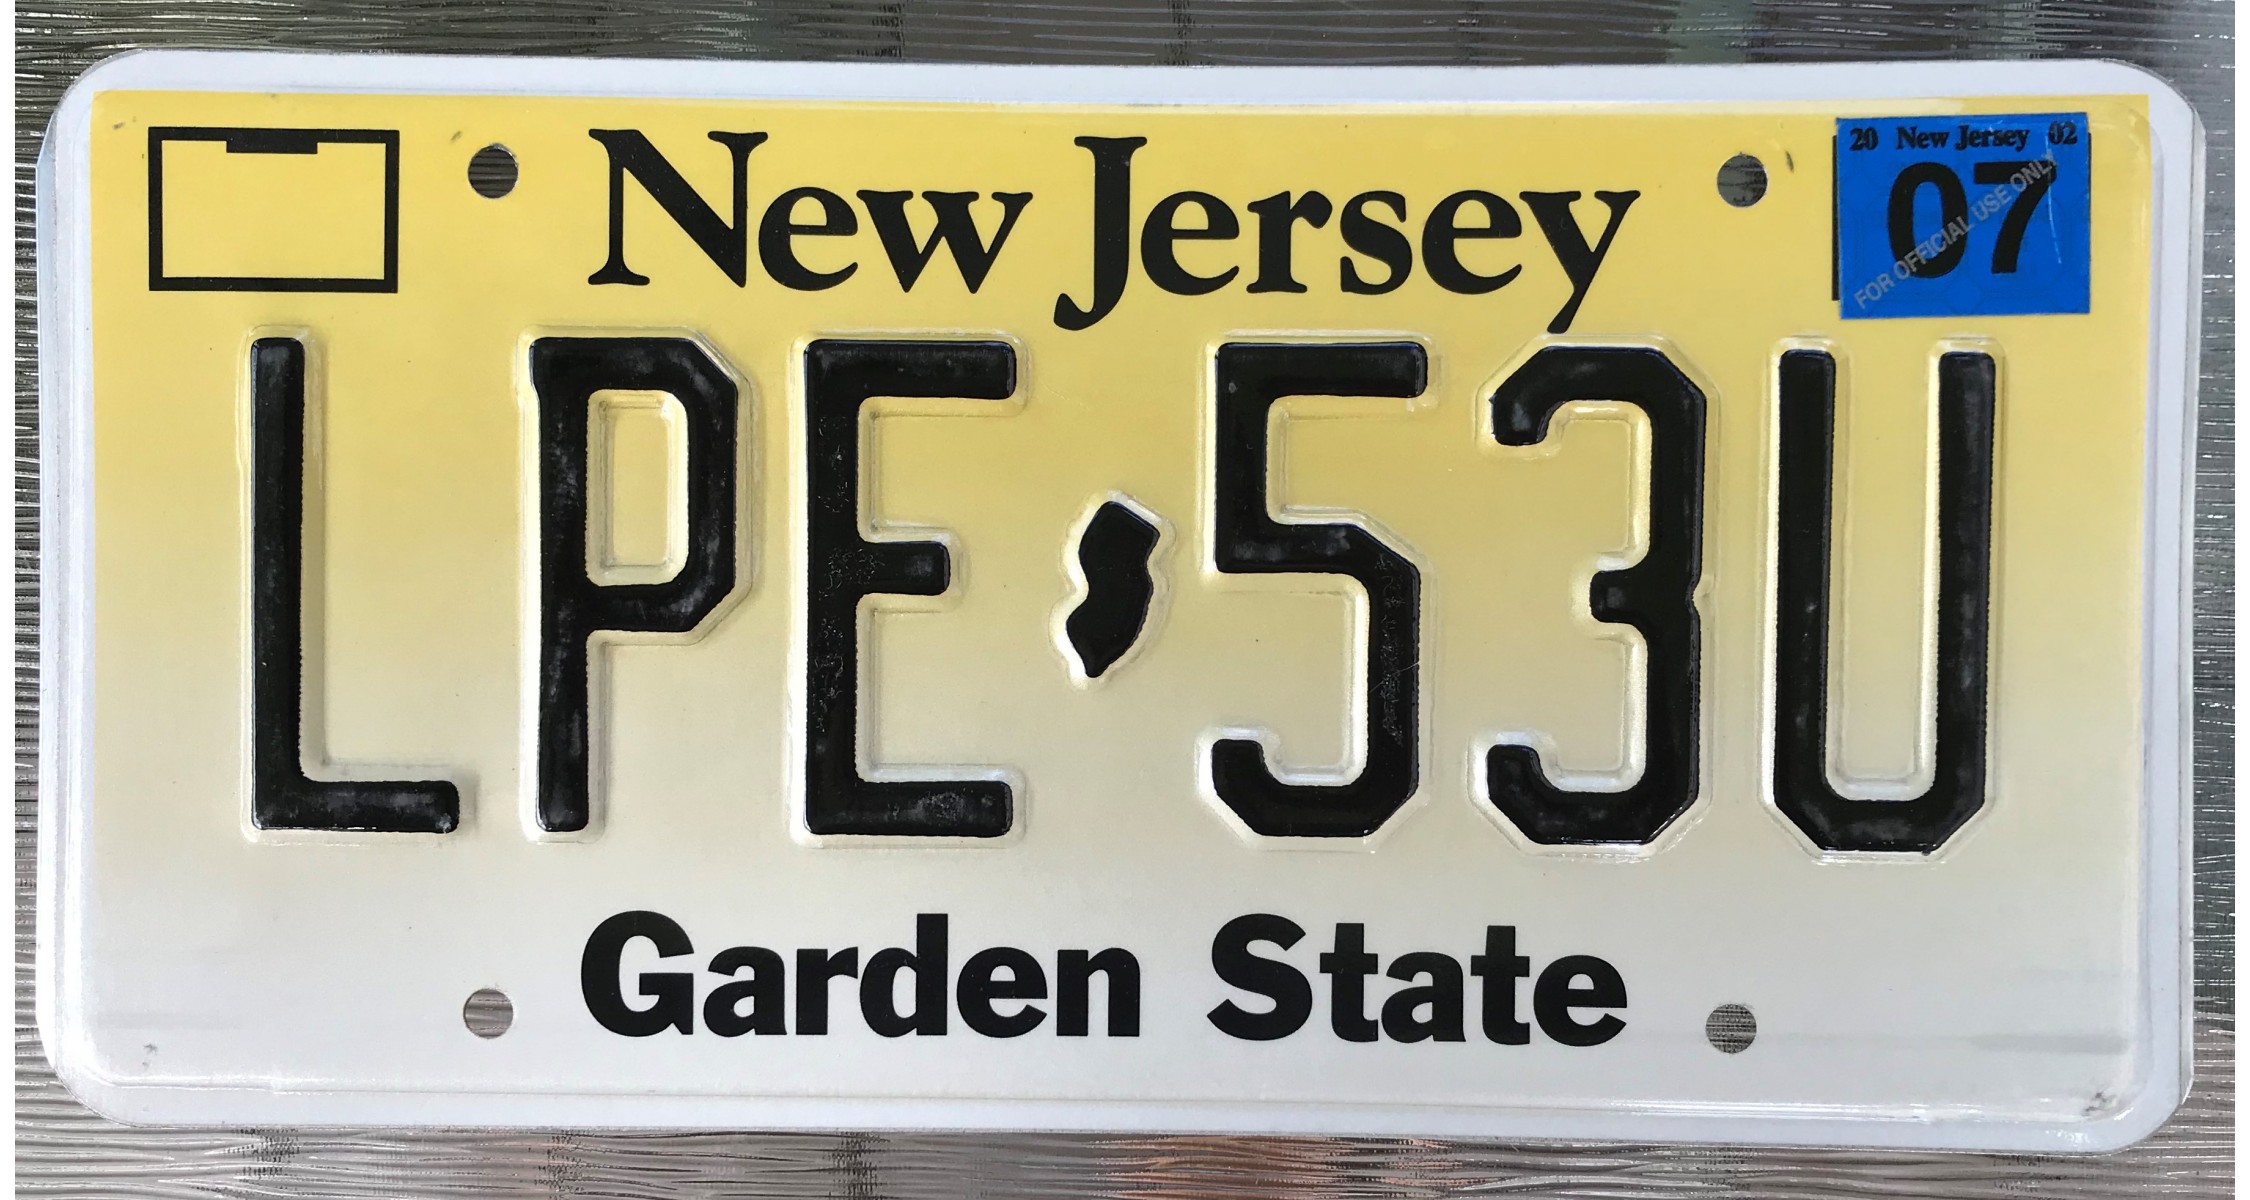 New Jersey license plate